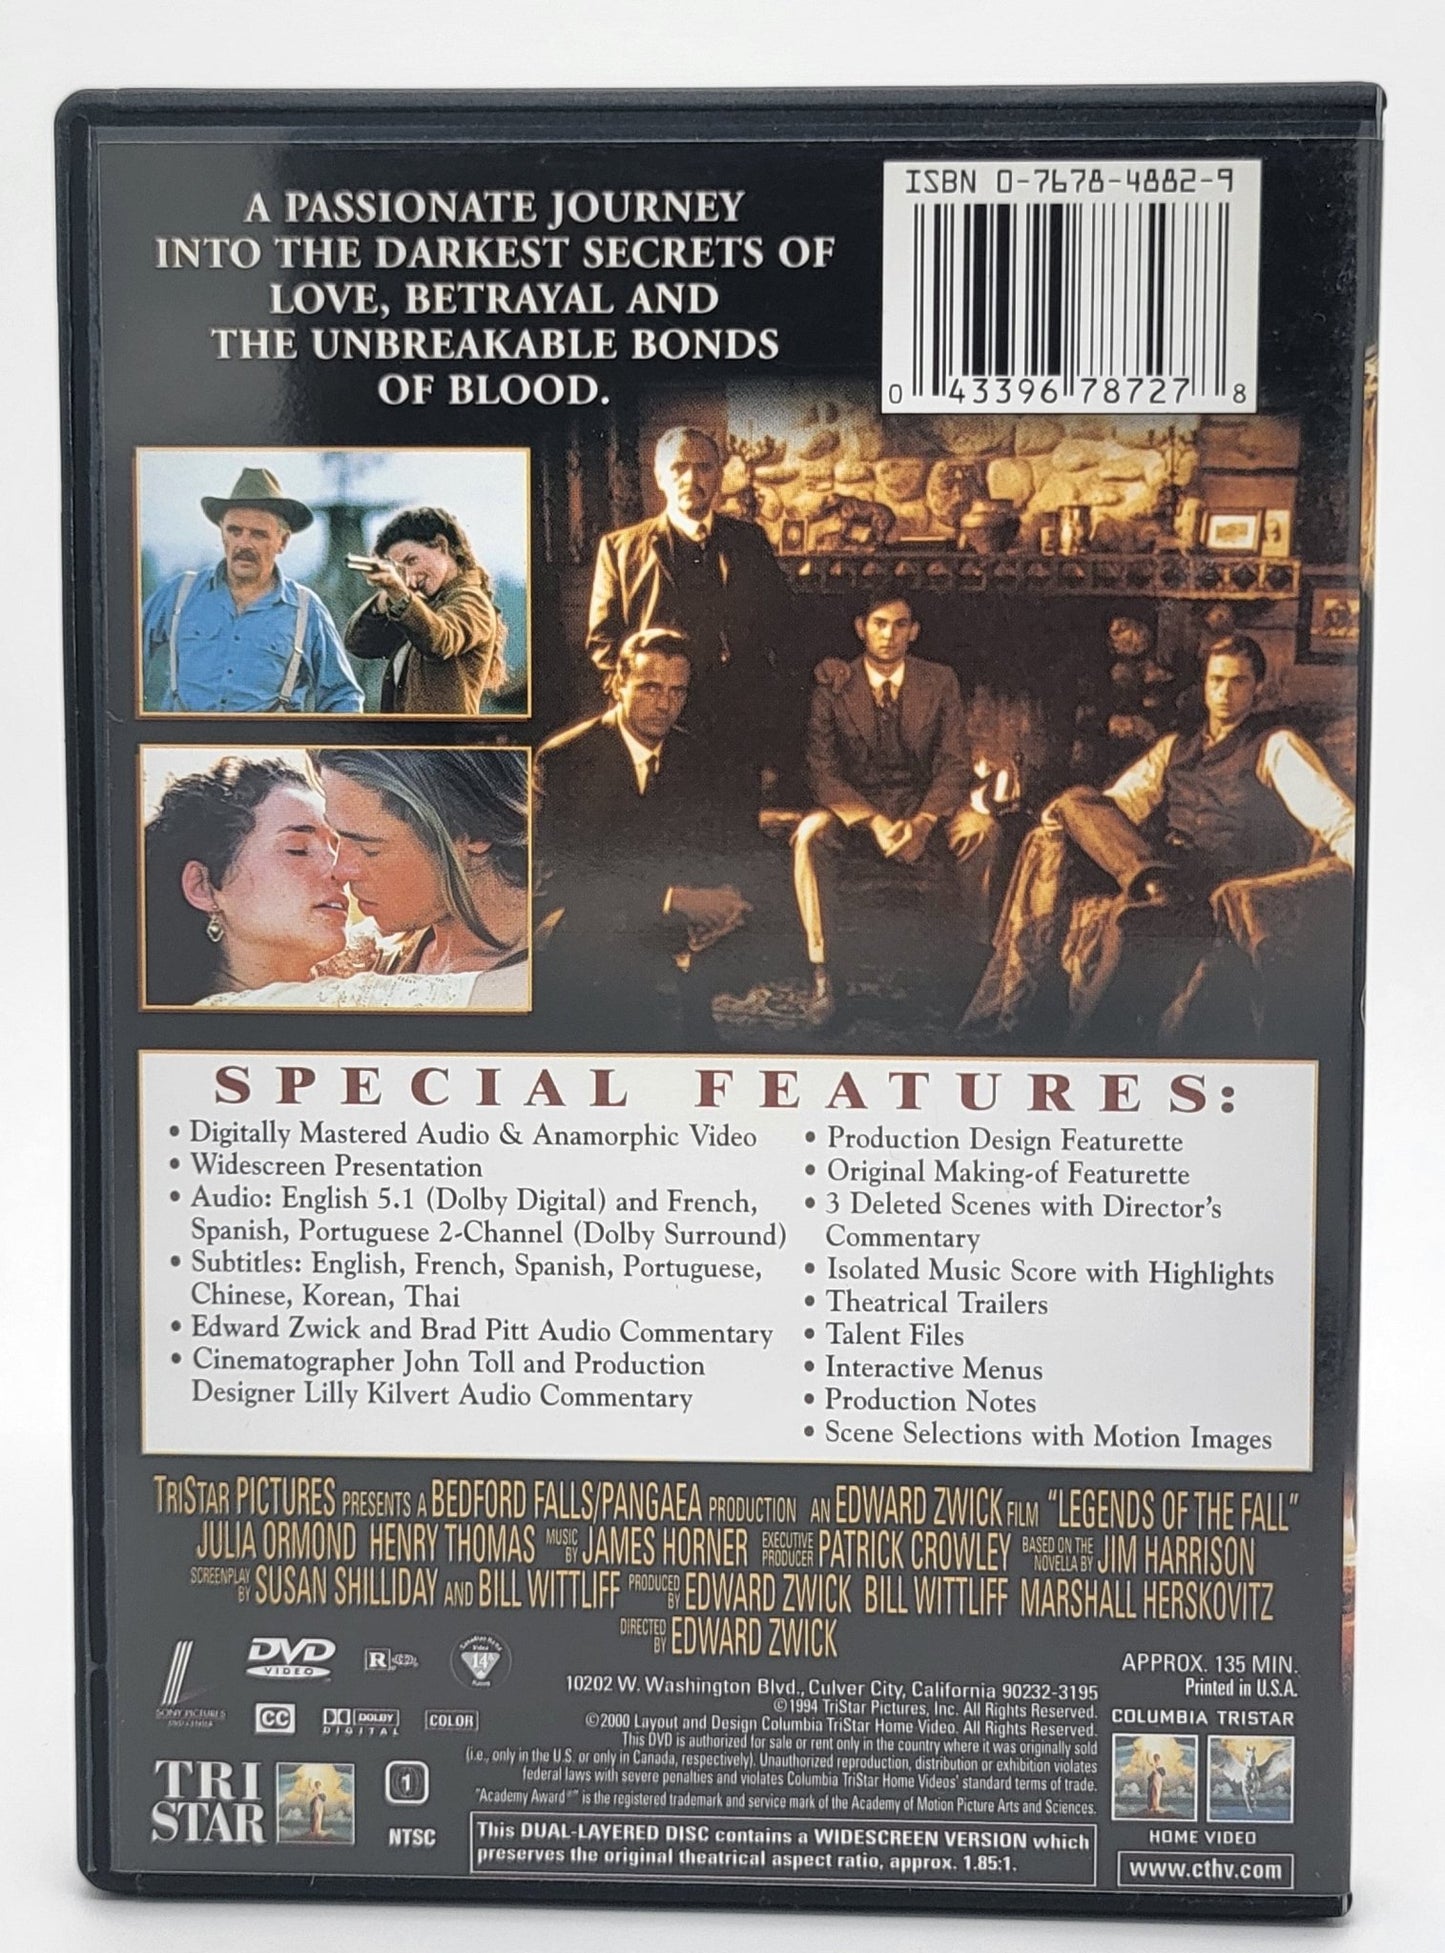 ‎ Sony Pictures Home Entertainment - Legends of the Fall | DVD | Special Edition - Widescreen - DVD - Steady Bunny Shop